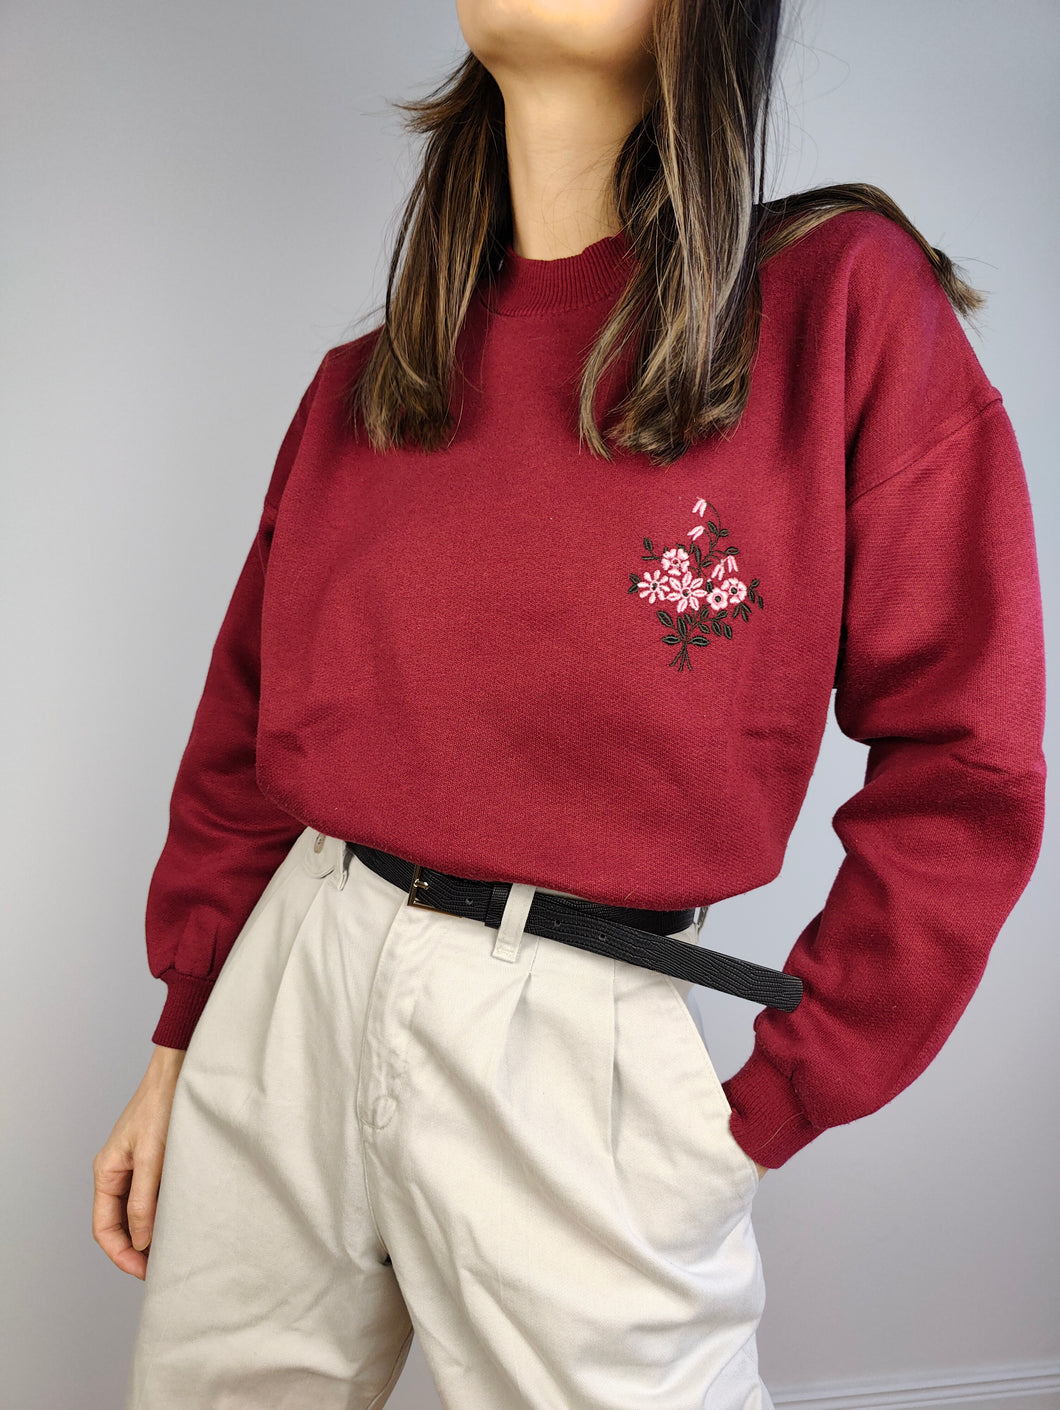 The Burgundy Sweatshirt | Vintage red flower embroidery sweater pullover S